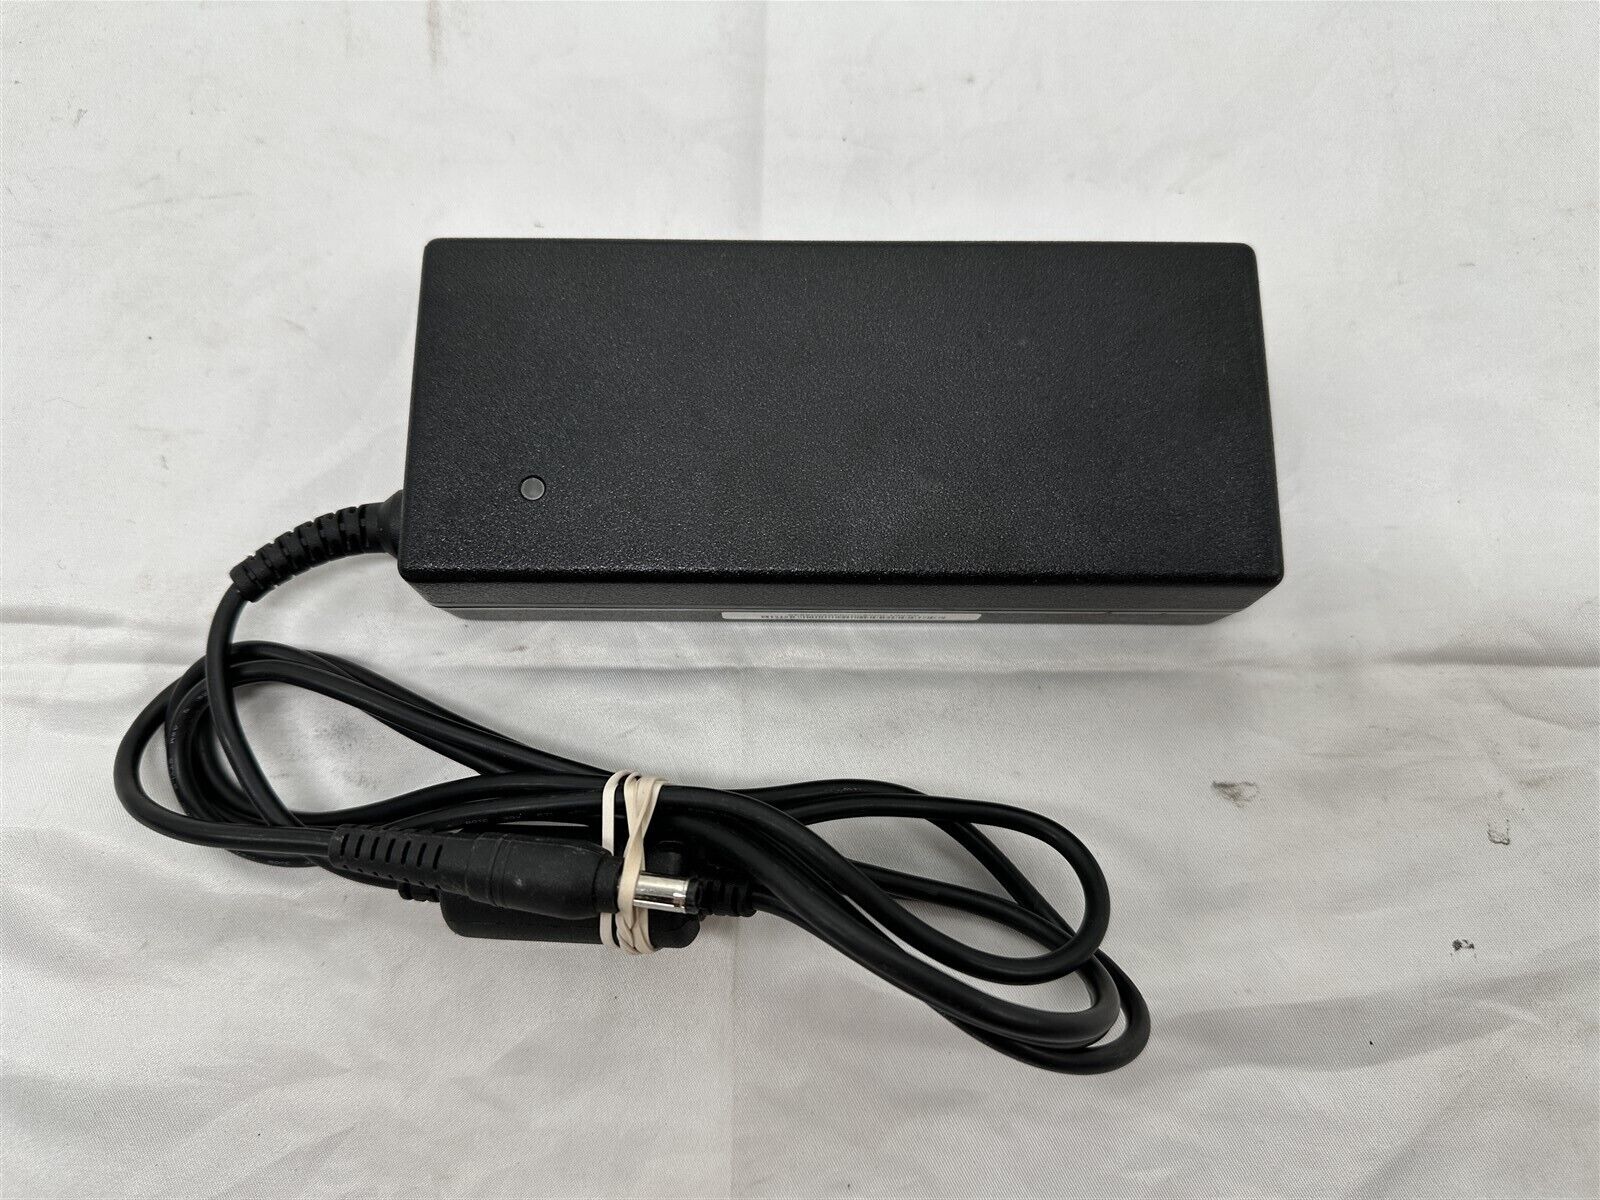 OEM Asus Laptop Charger AC Adapter Power Supply ADP-120ZB BB 19V 6.32A 120W